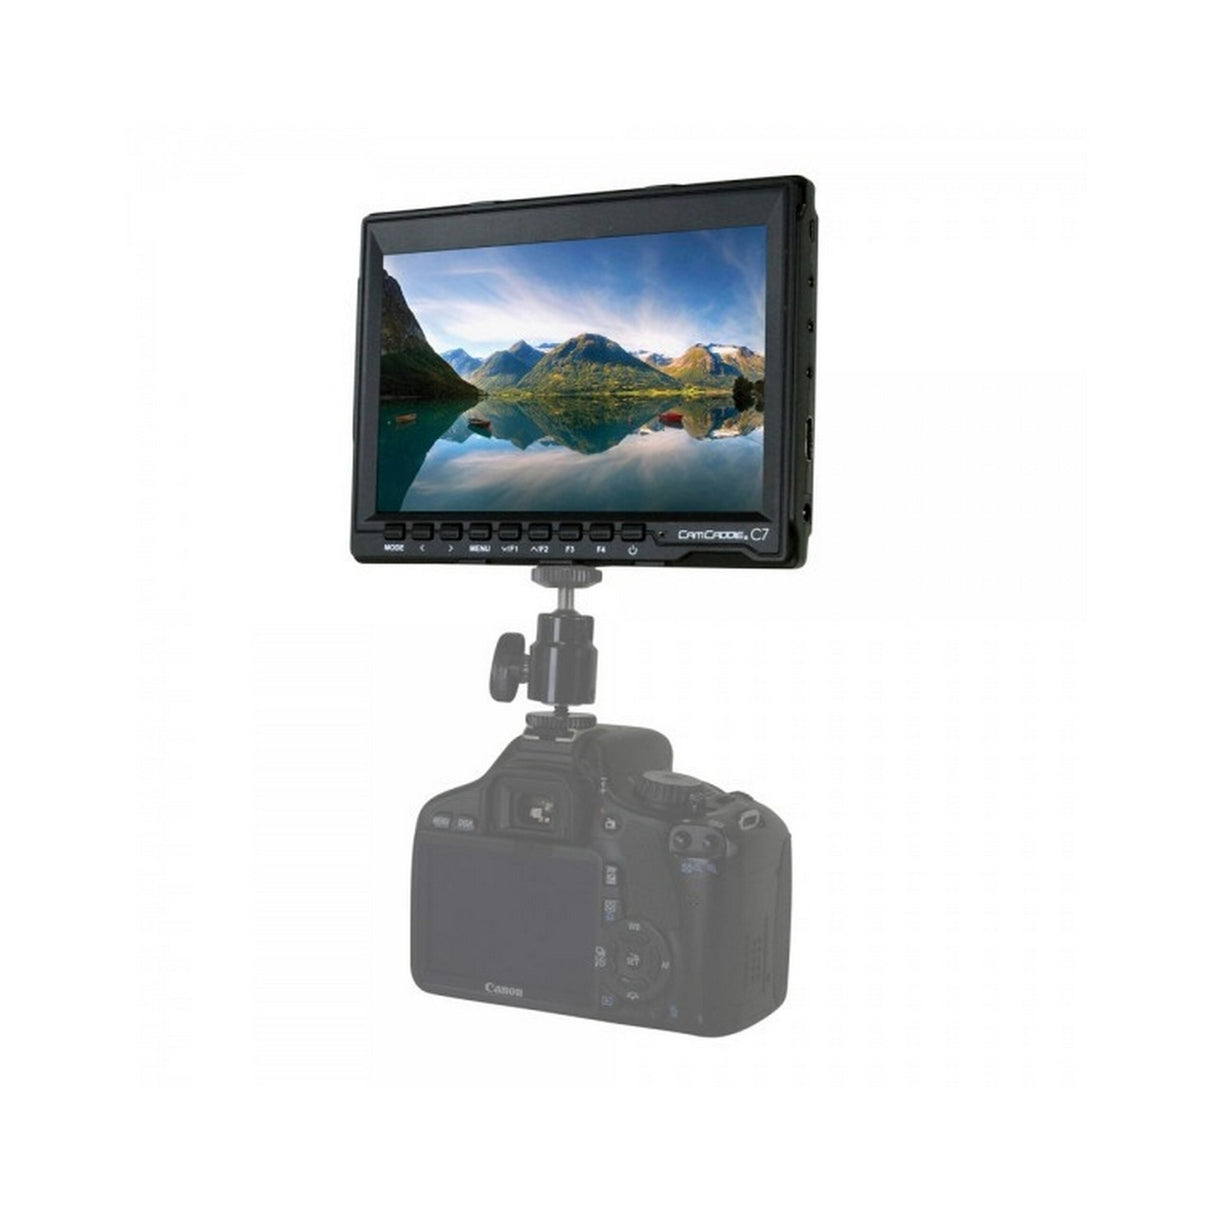 CamCaddie 0CC-MON-C7-EU 7 Inch HD IPS DSLR Monitor with European Power Supply and NP-F Battery Plate